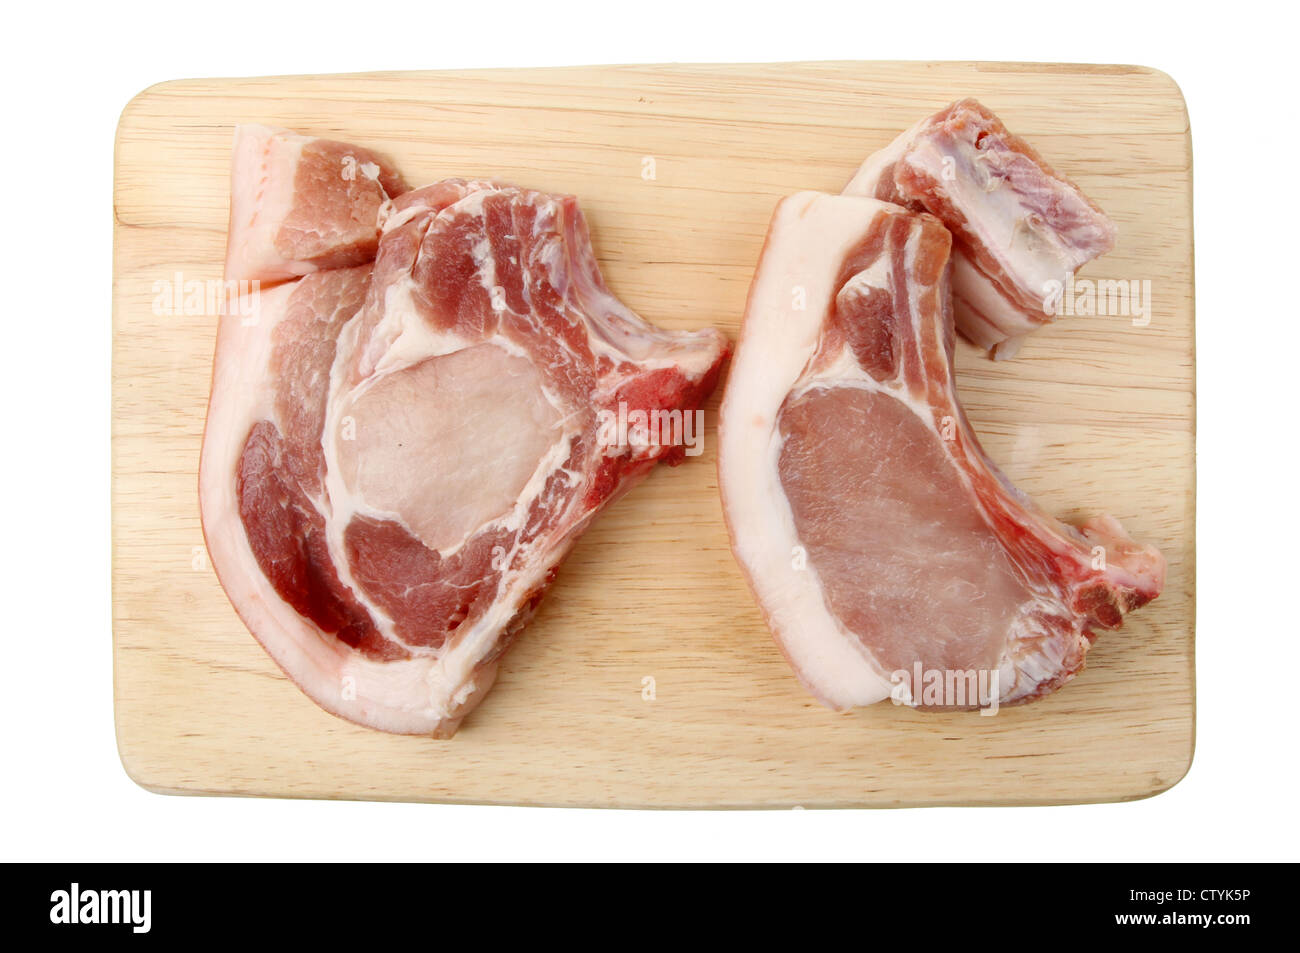 Two raw pork chops on a wooden board photographed from above isolated against white Stock Photo